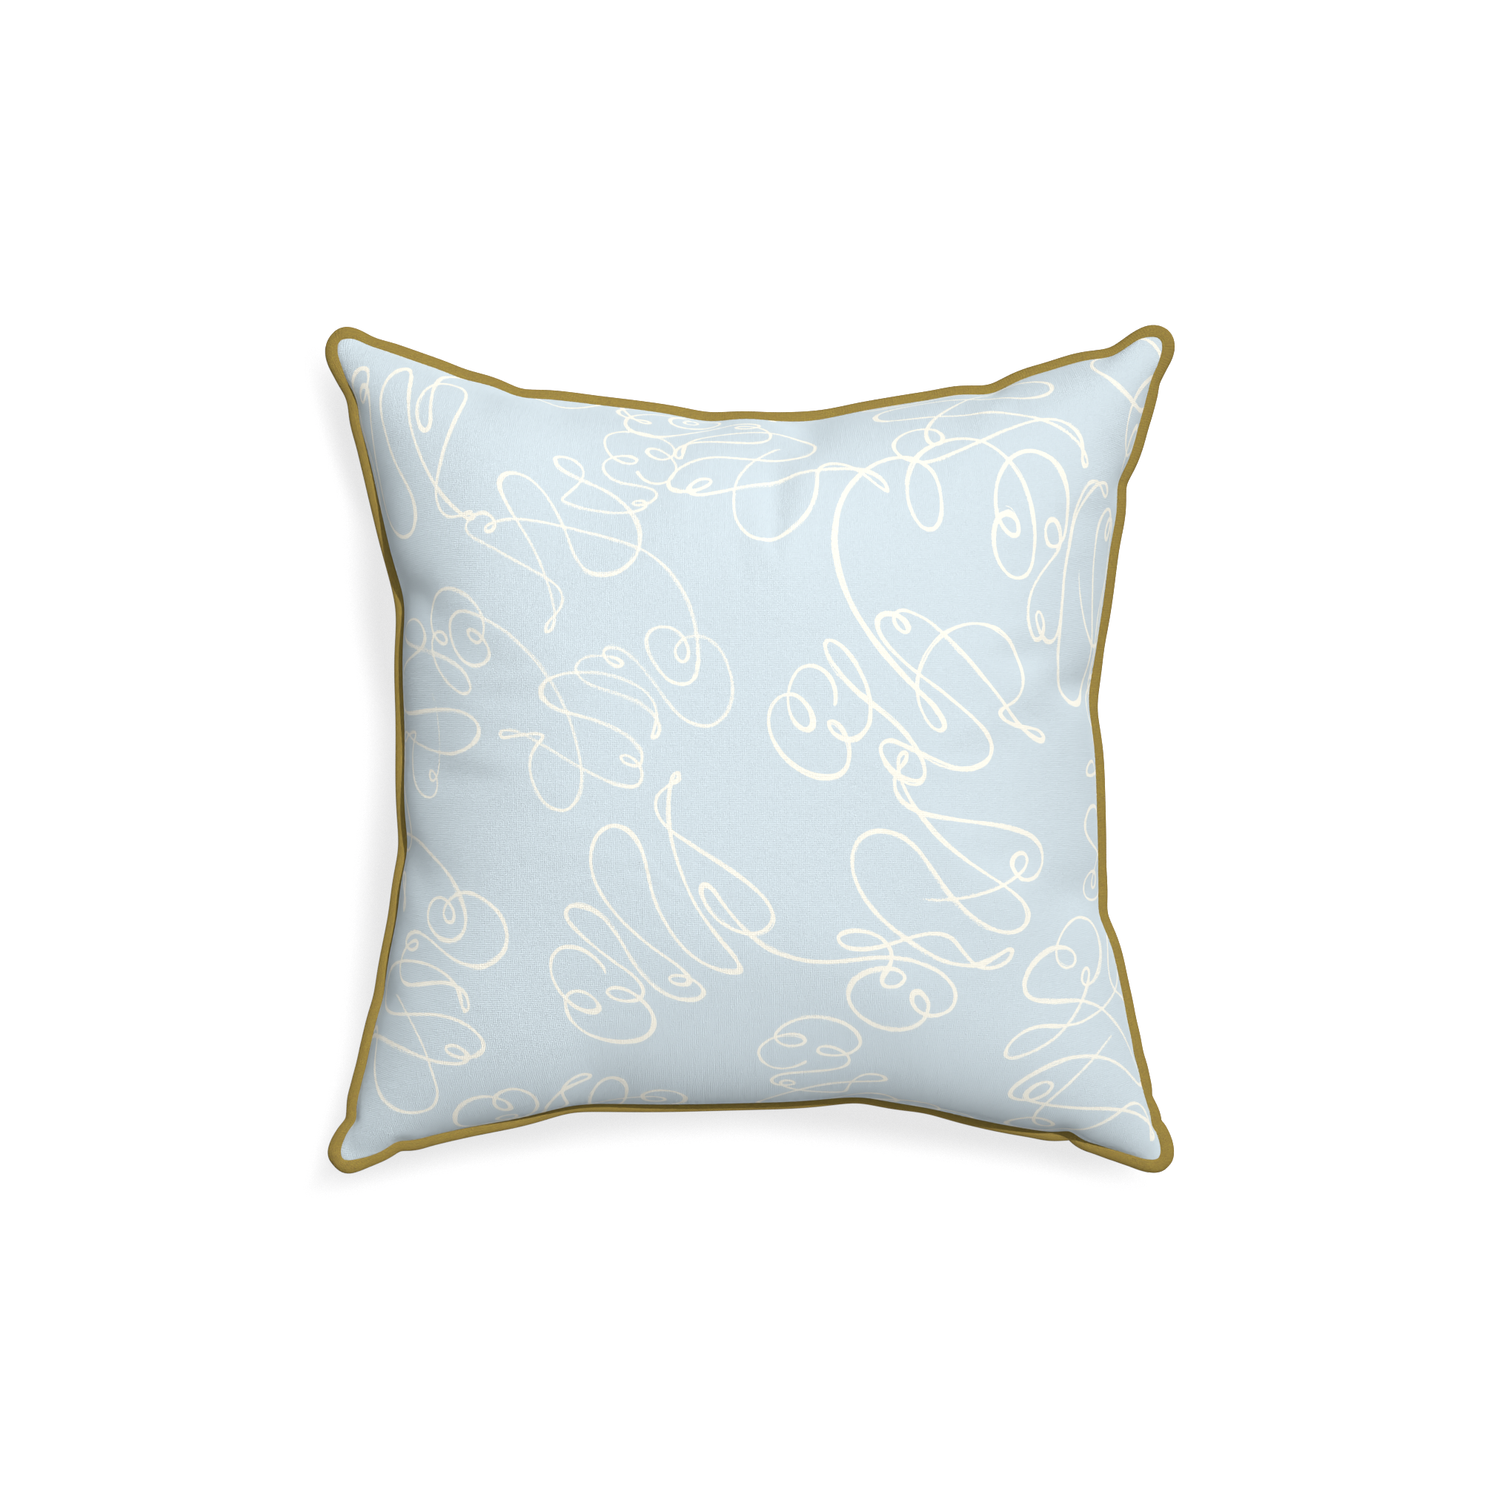 18-square mirabella custom powder blue abstractpillow with c piping on white background